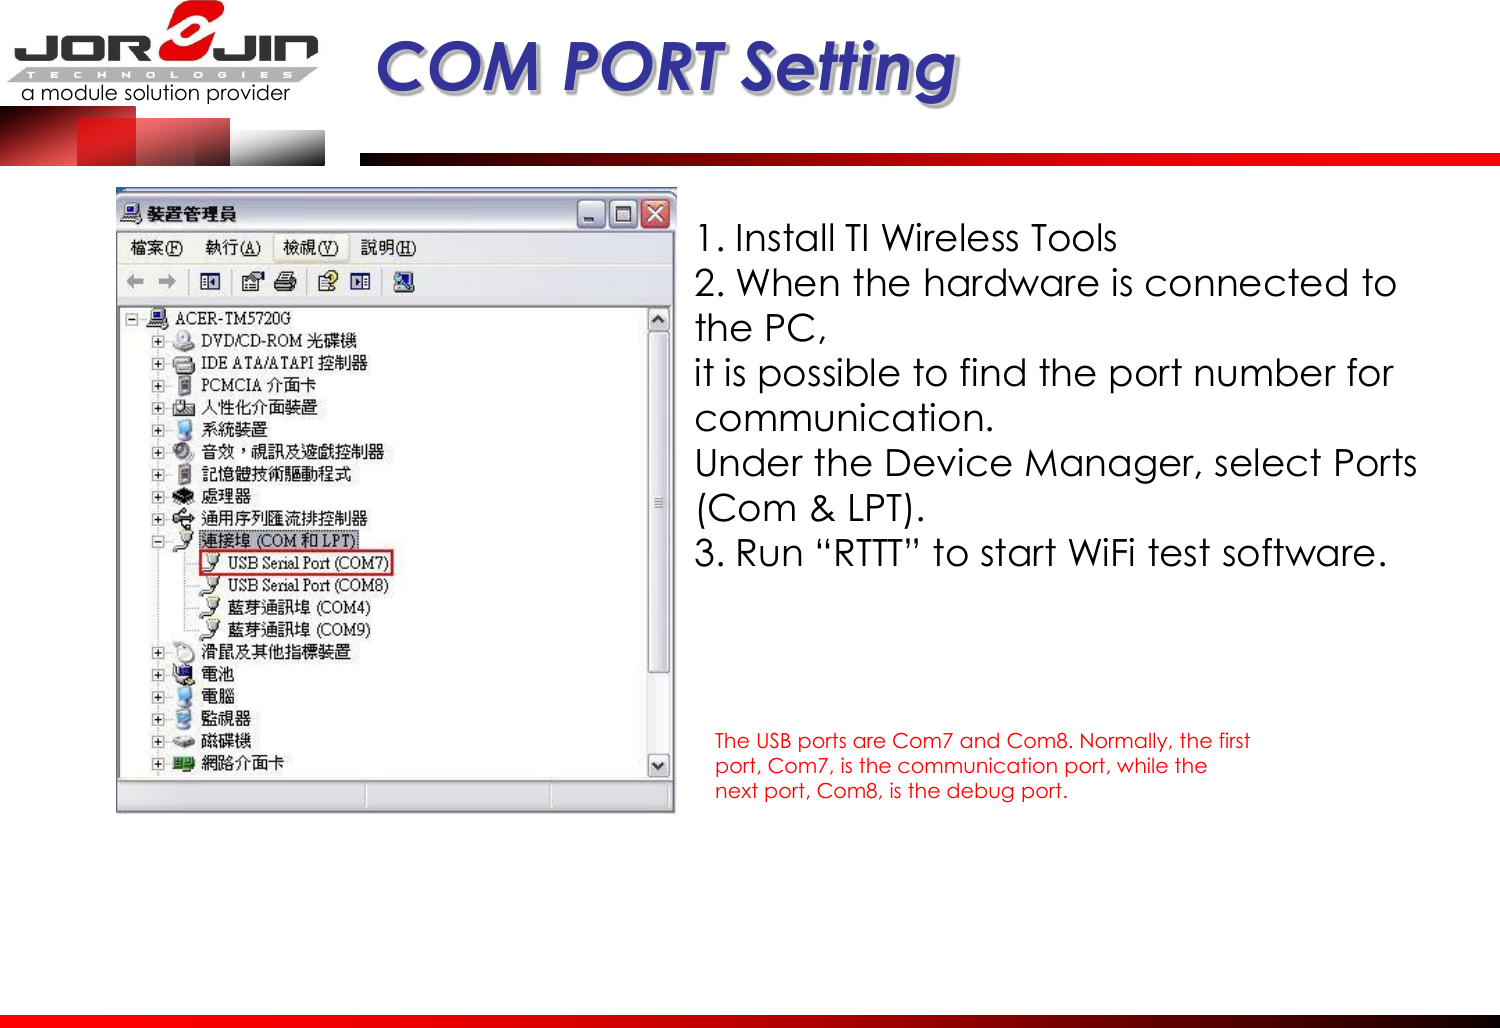 a module solution provider  COM PORT Setting 1. Install TI Wireless Tools 2. When the hardware is connected to the PC, it is possible to find the port number for communication. Under the Device Manager, select Ports (Com &amp; LPT). 3. Run “RTTT” to start WiFi test software. The USB ports are Com7 and Com8. Normally, the first port, Com7, is the communication port, while the next port, Com8, is the debug port. 